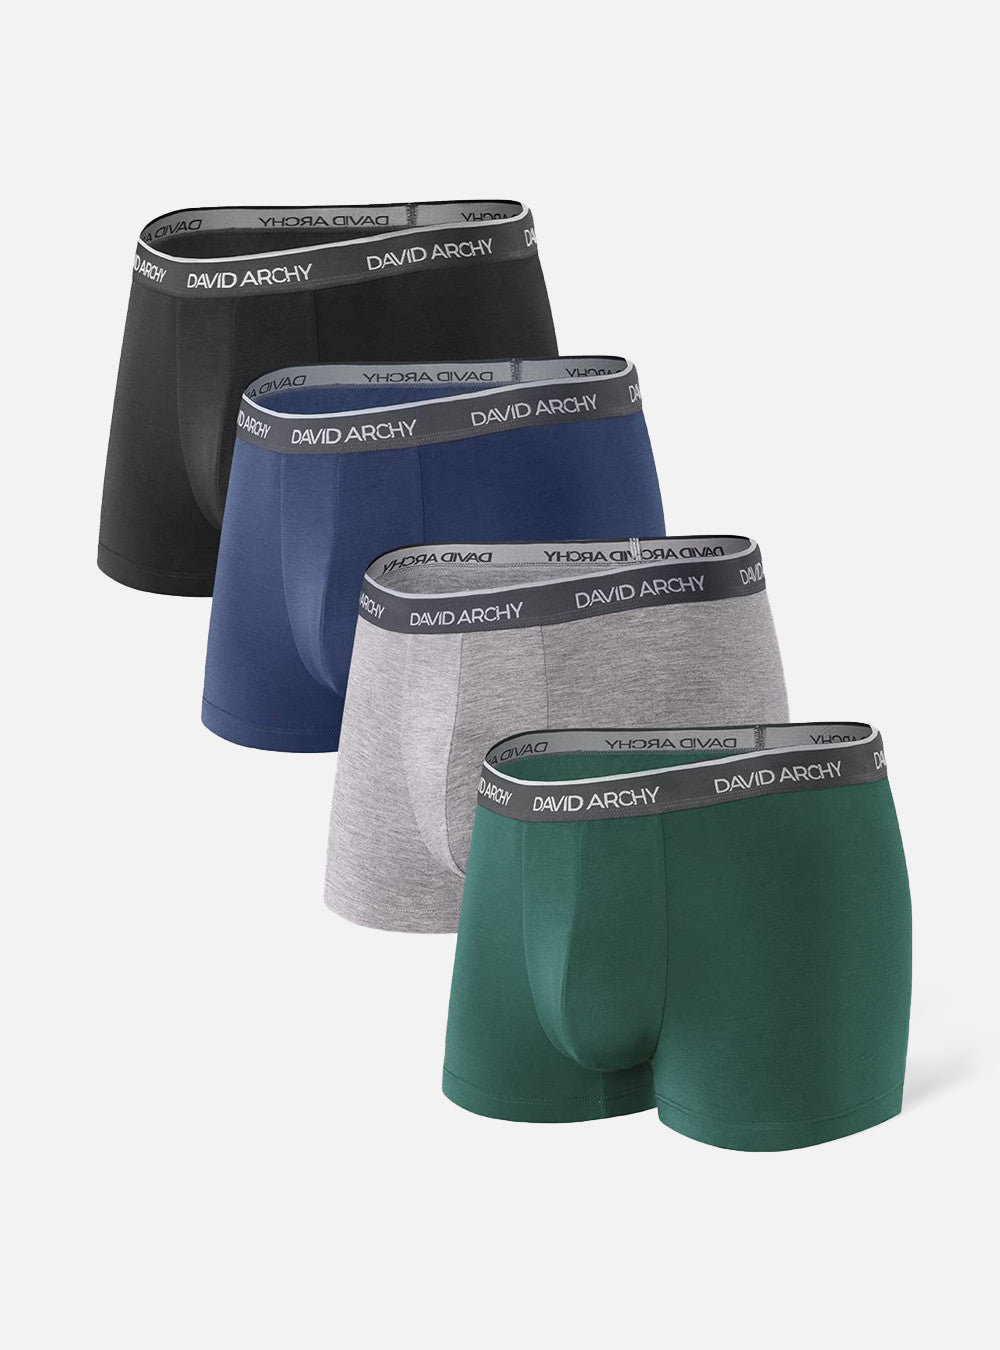 David Archy 4 Packs Bamboo Trunks With Dual Pouch Ultra Soft